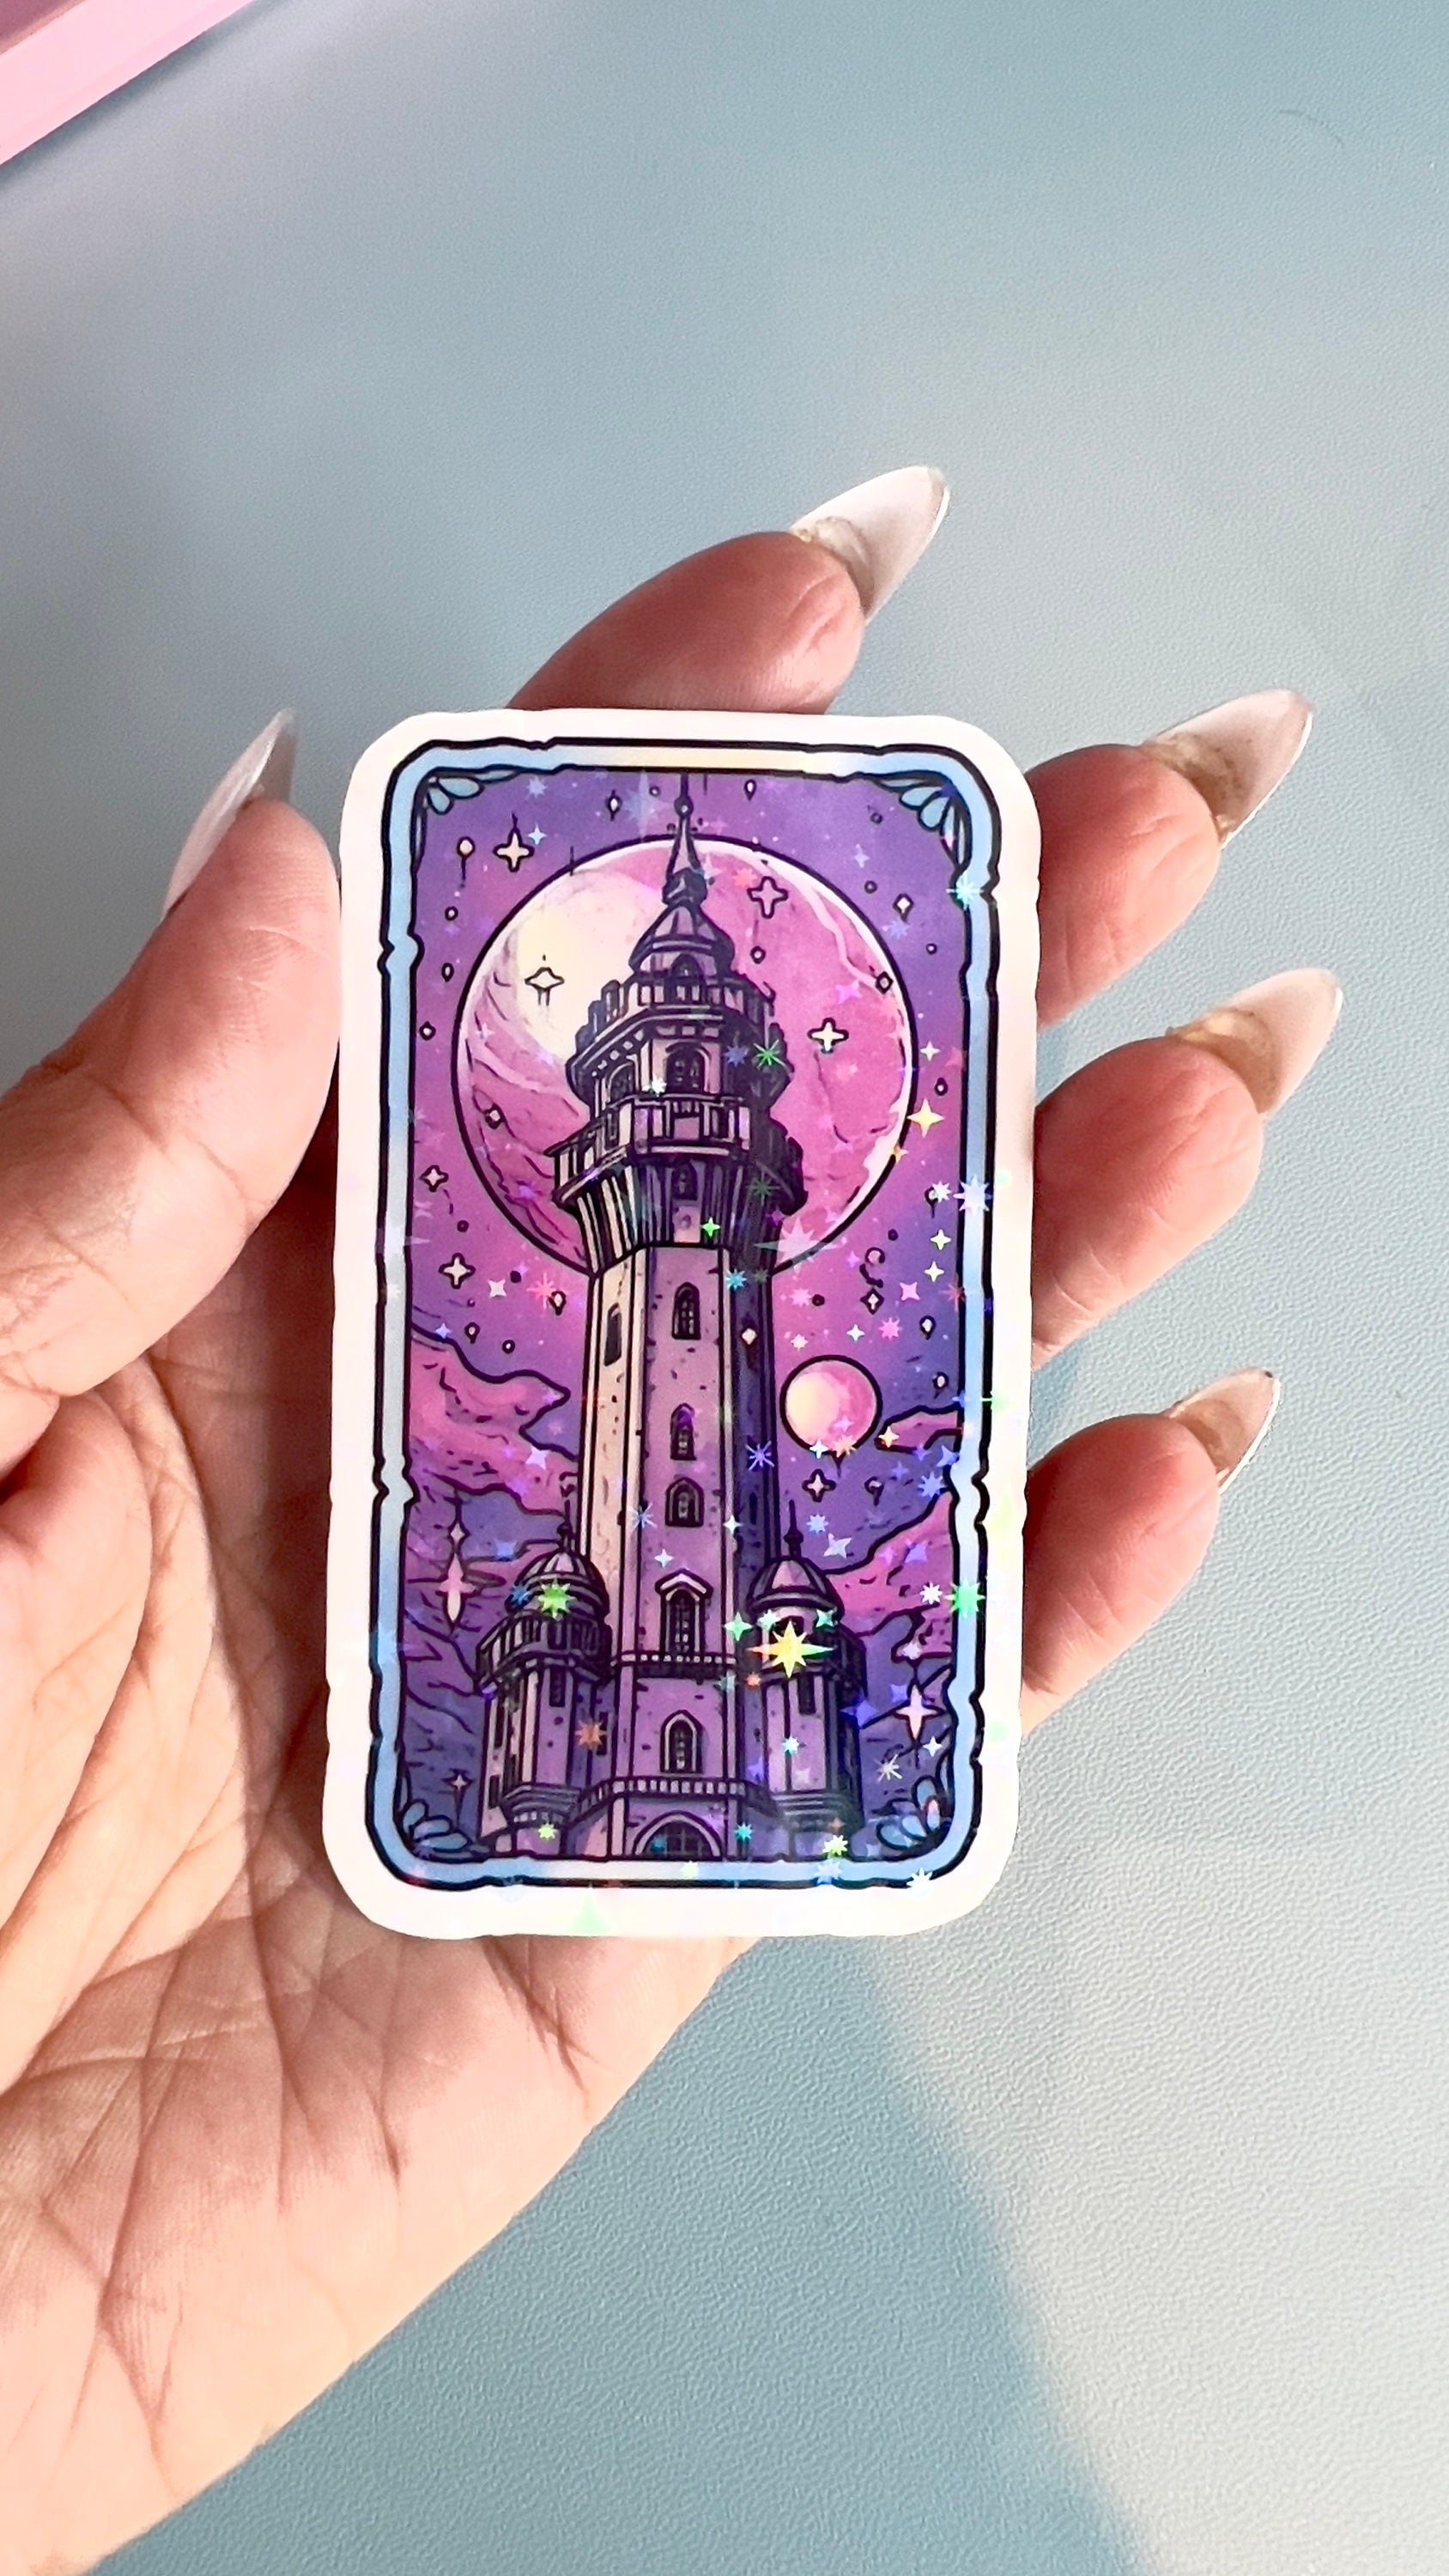 The Tower Tarot Sticker, booktok, journal, witchy sticker, kindle decor cover, moon stars, laptop, tablet, phone case, pastel mystic,